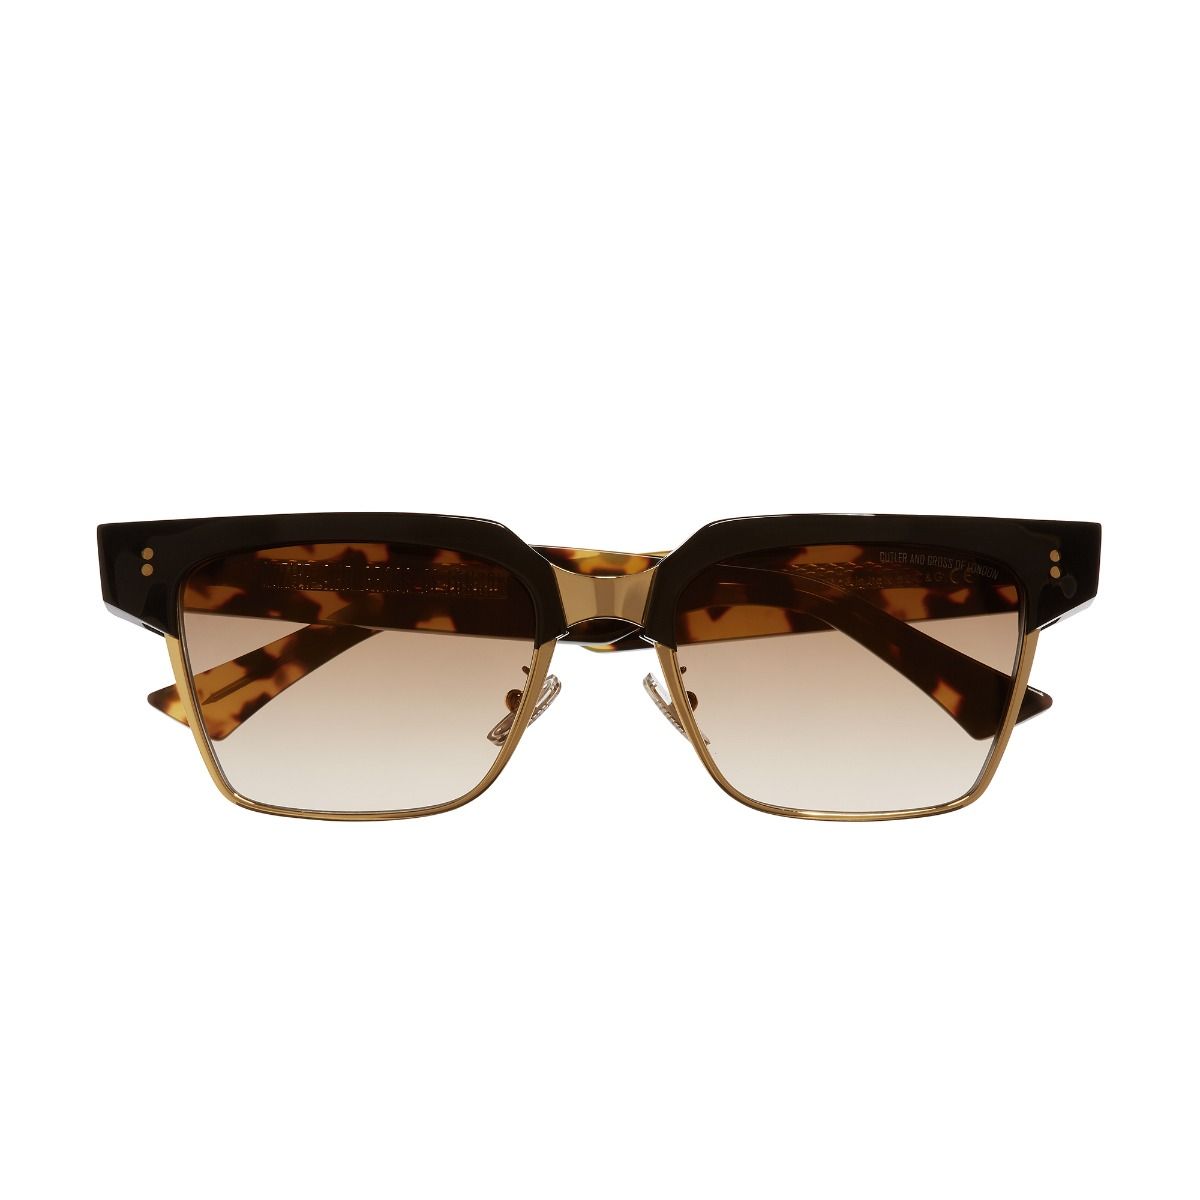 1348 Browline Sunglasses-Black Taxi & Gold (Brown Lens)